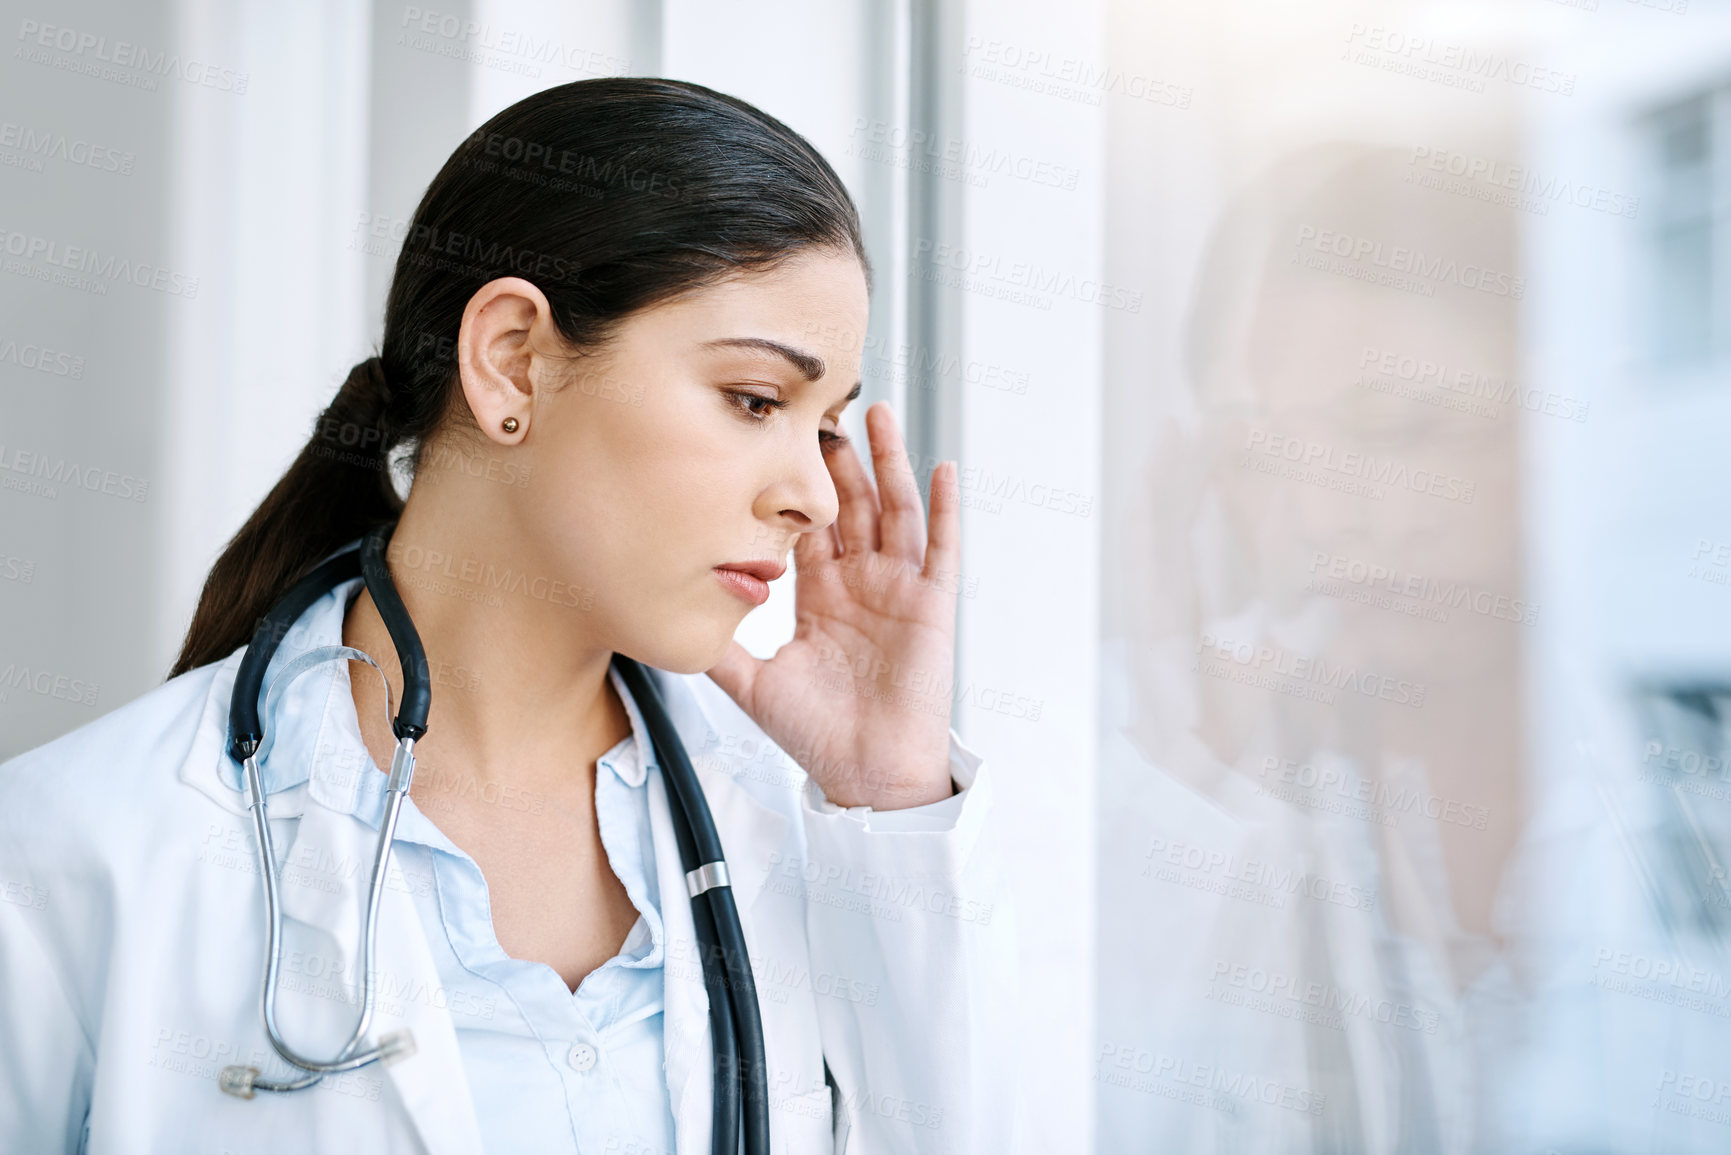 Buy stock photo Shot of a young female doctor looking stressed out while standing at a window in a hospital